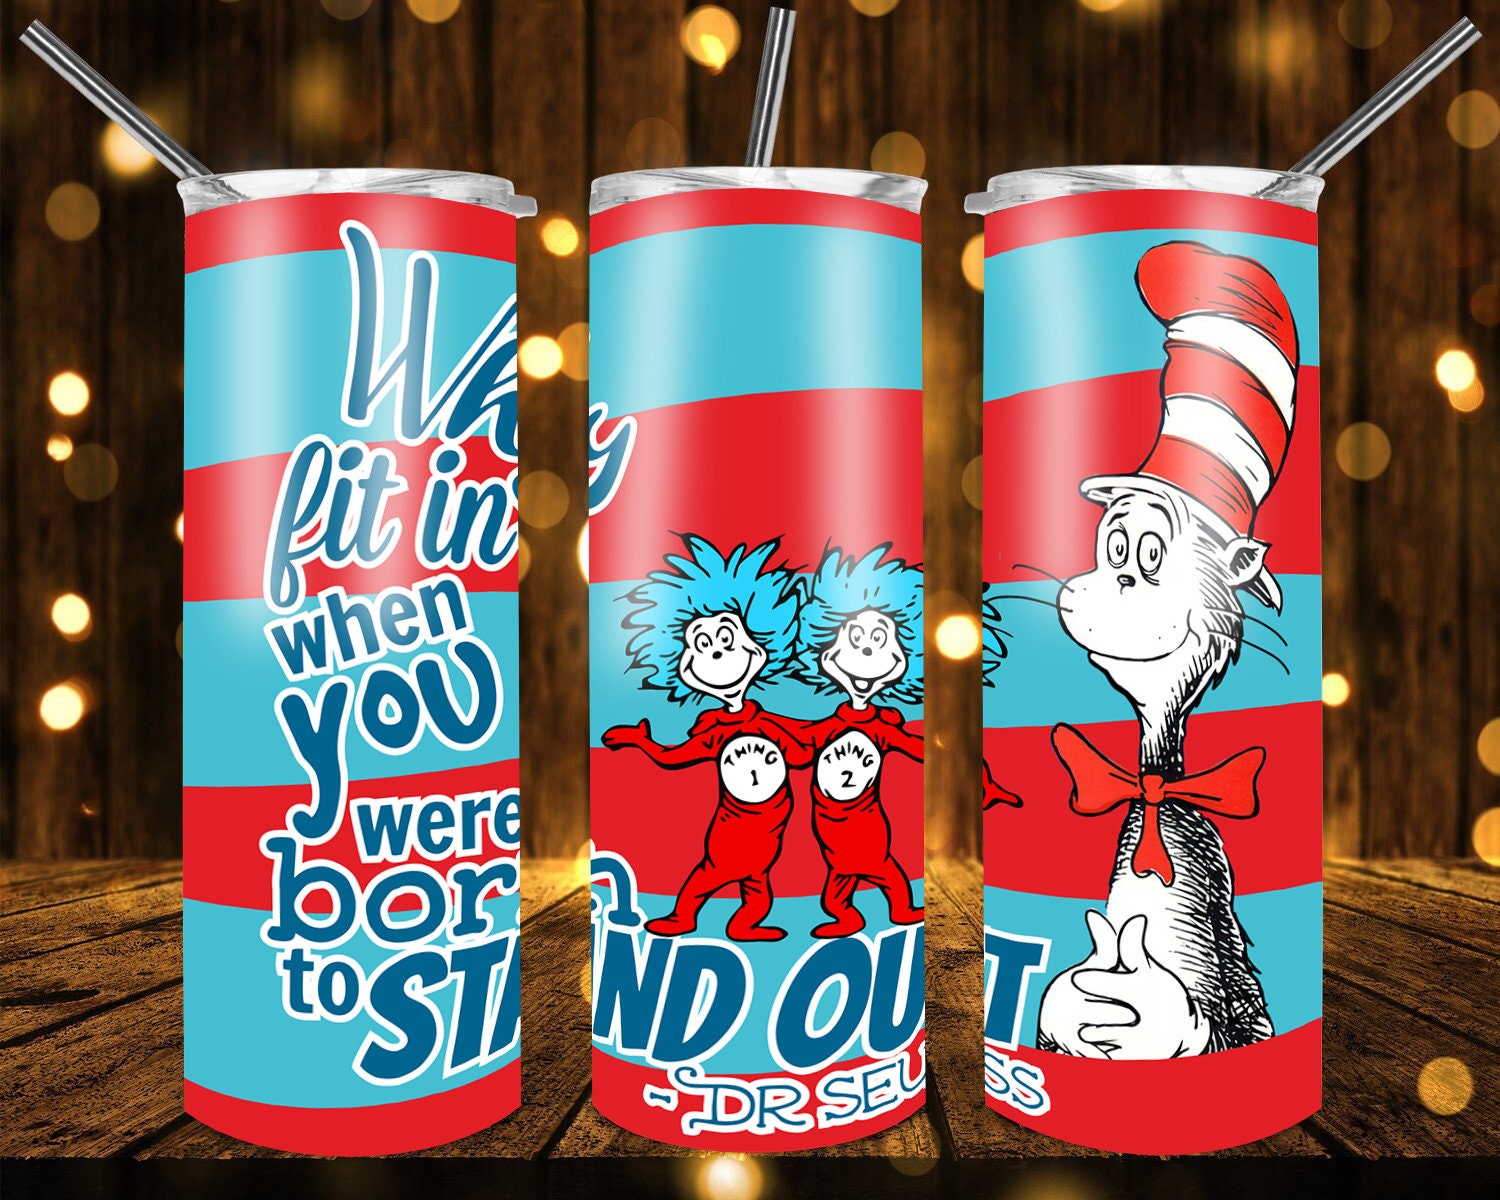 6 oz. Mini Dr. Seuss™ The Cat in the Hat™ Reusable BPA-Free Plastic Cups  with Lids & Straws - 12 Ct.